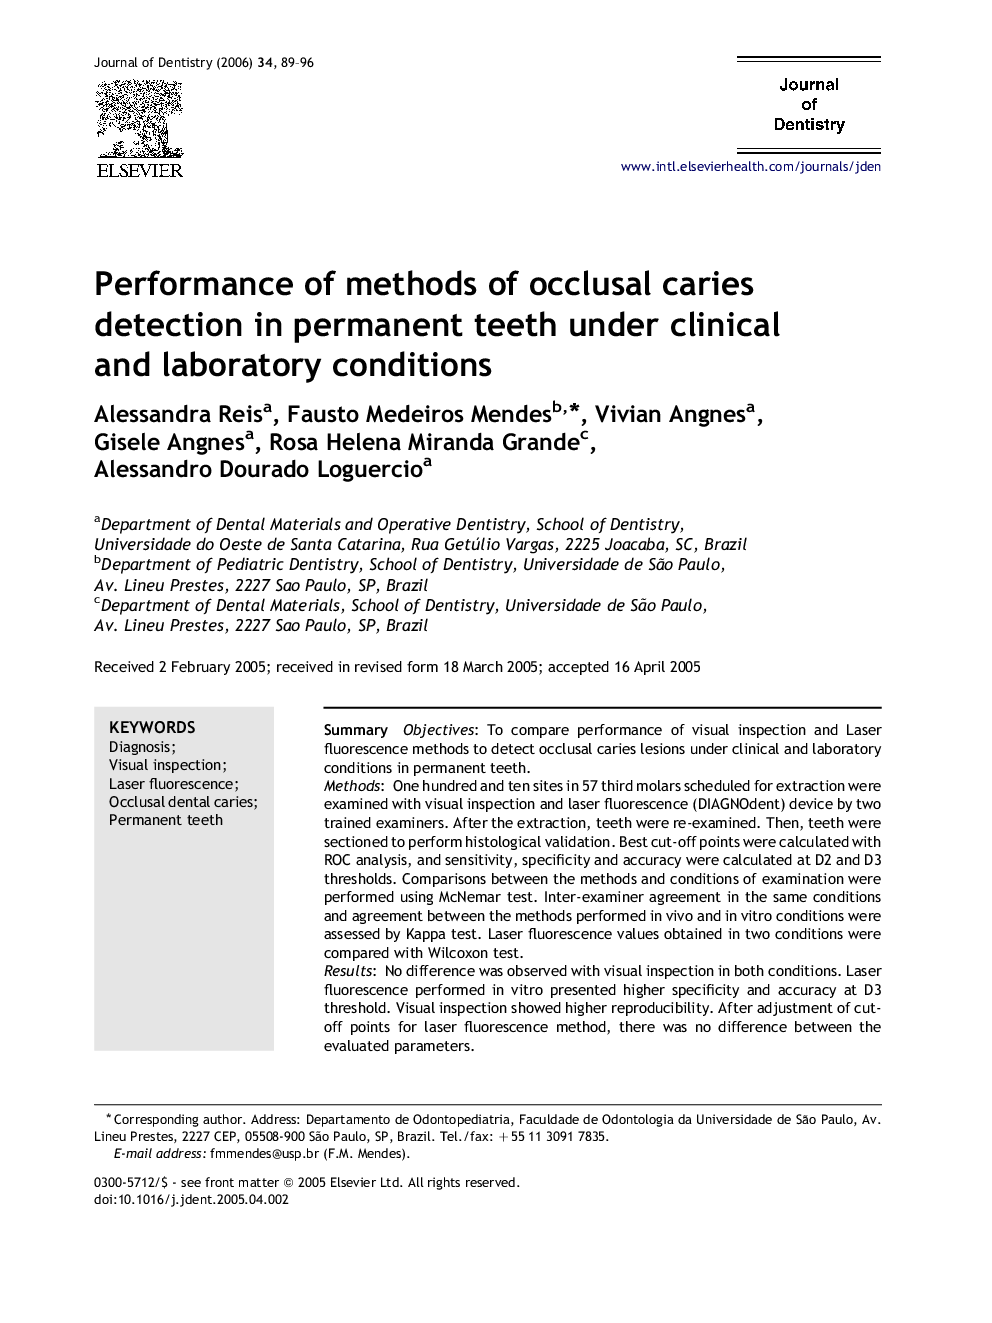 Performance of methods of occlusal caries detection in permanent teeth under clinical and laboratory conditions